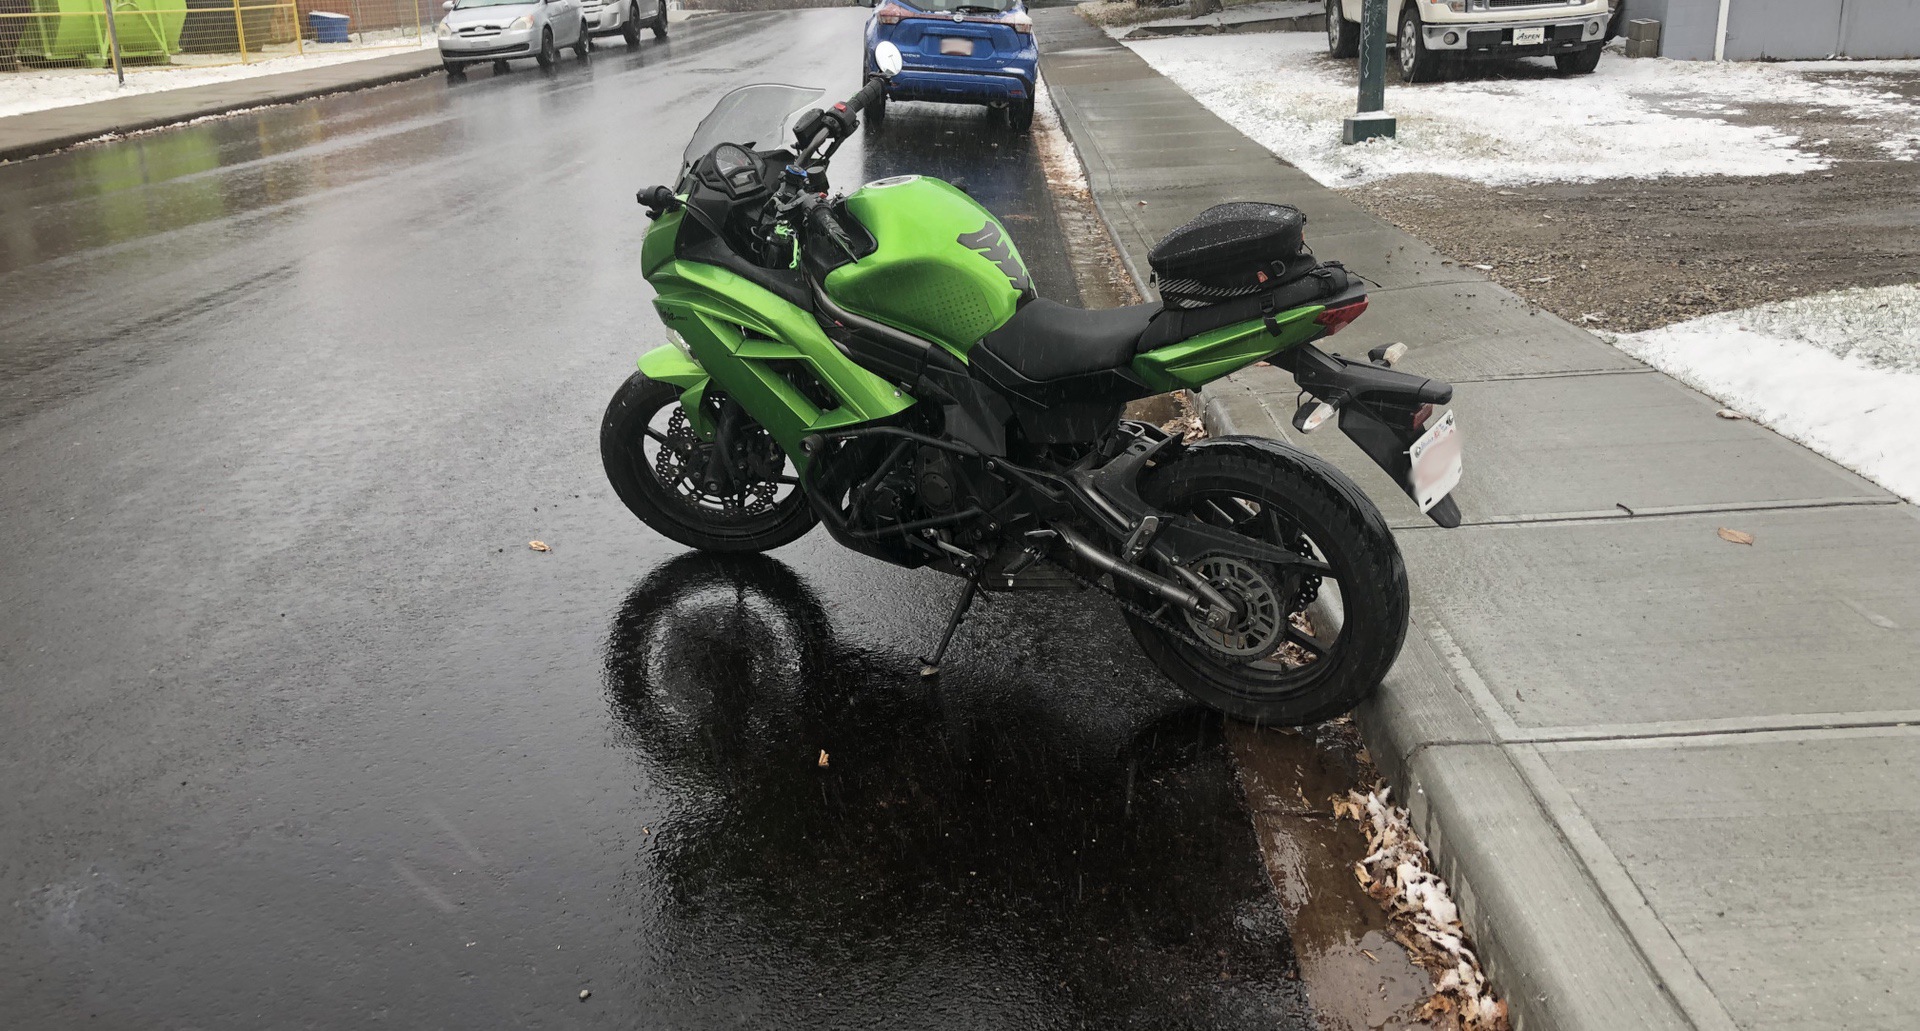 2012 Kawasaki Ninja 650 parked on the last day a bike could go out in